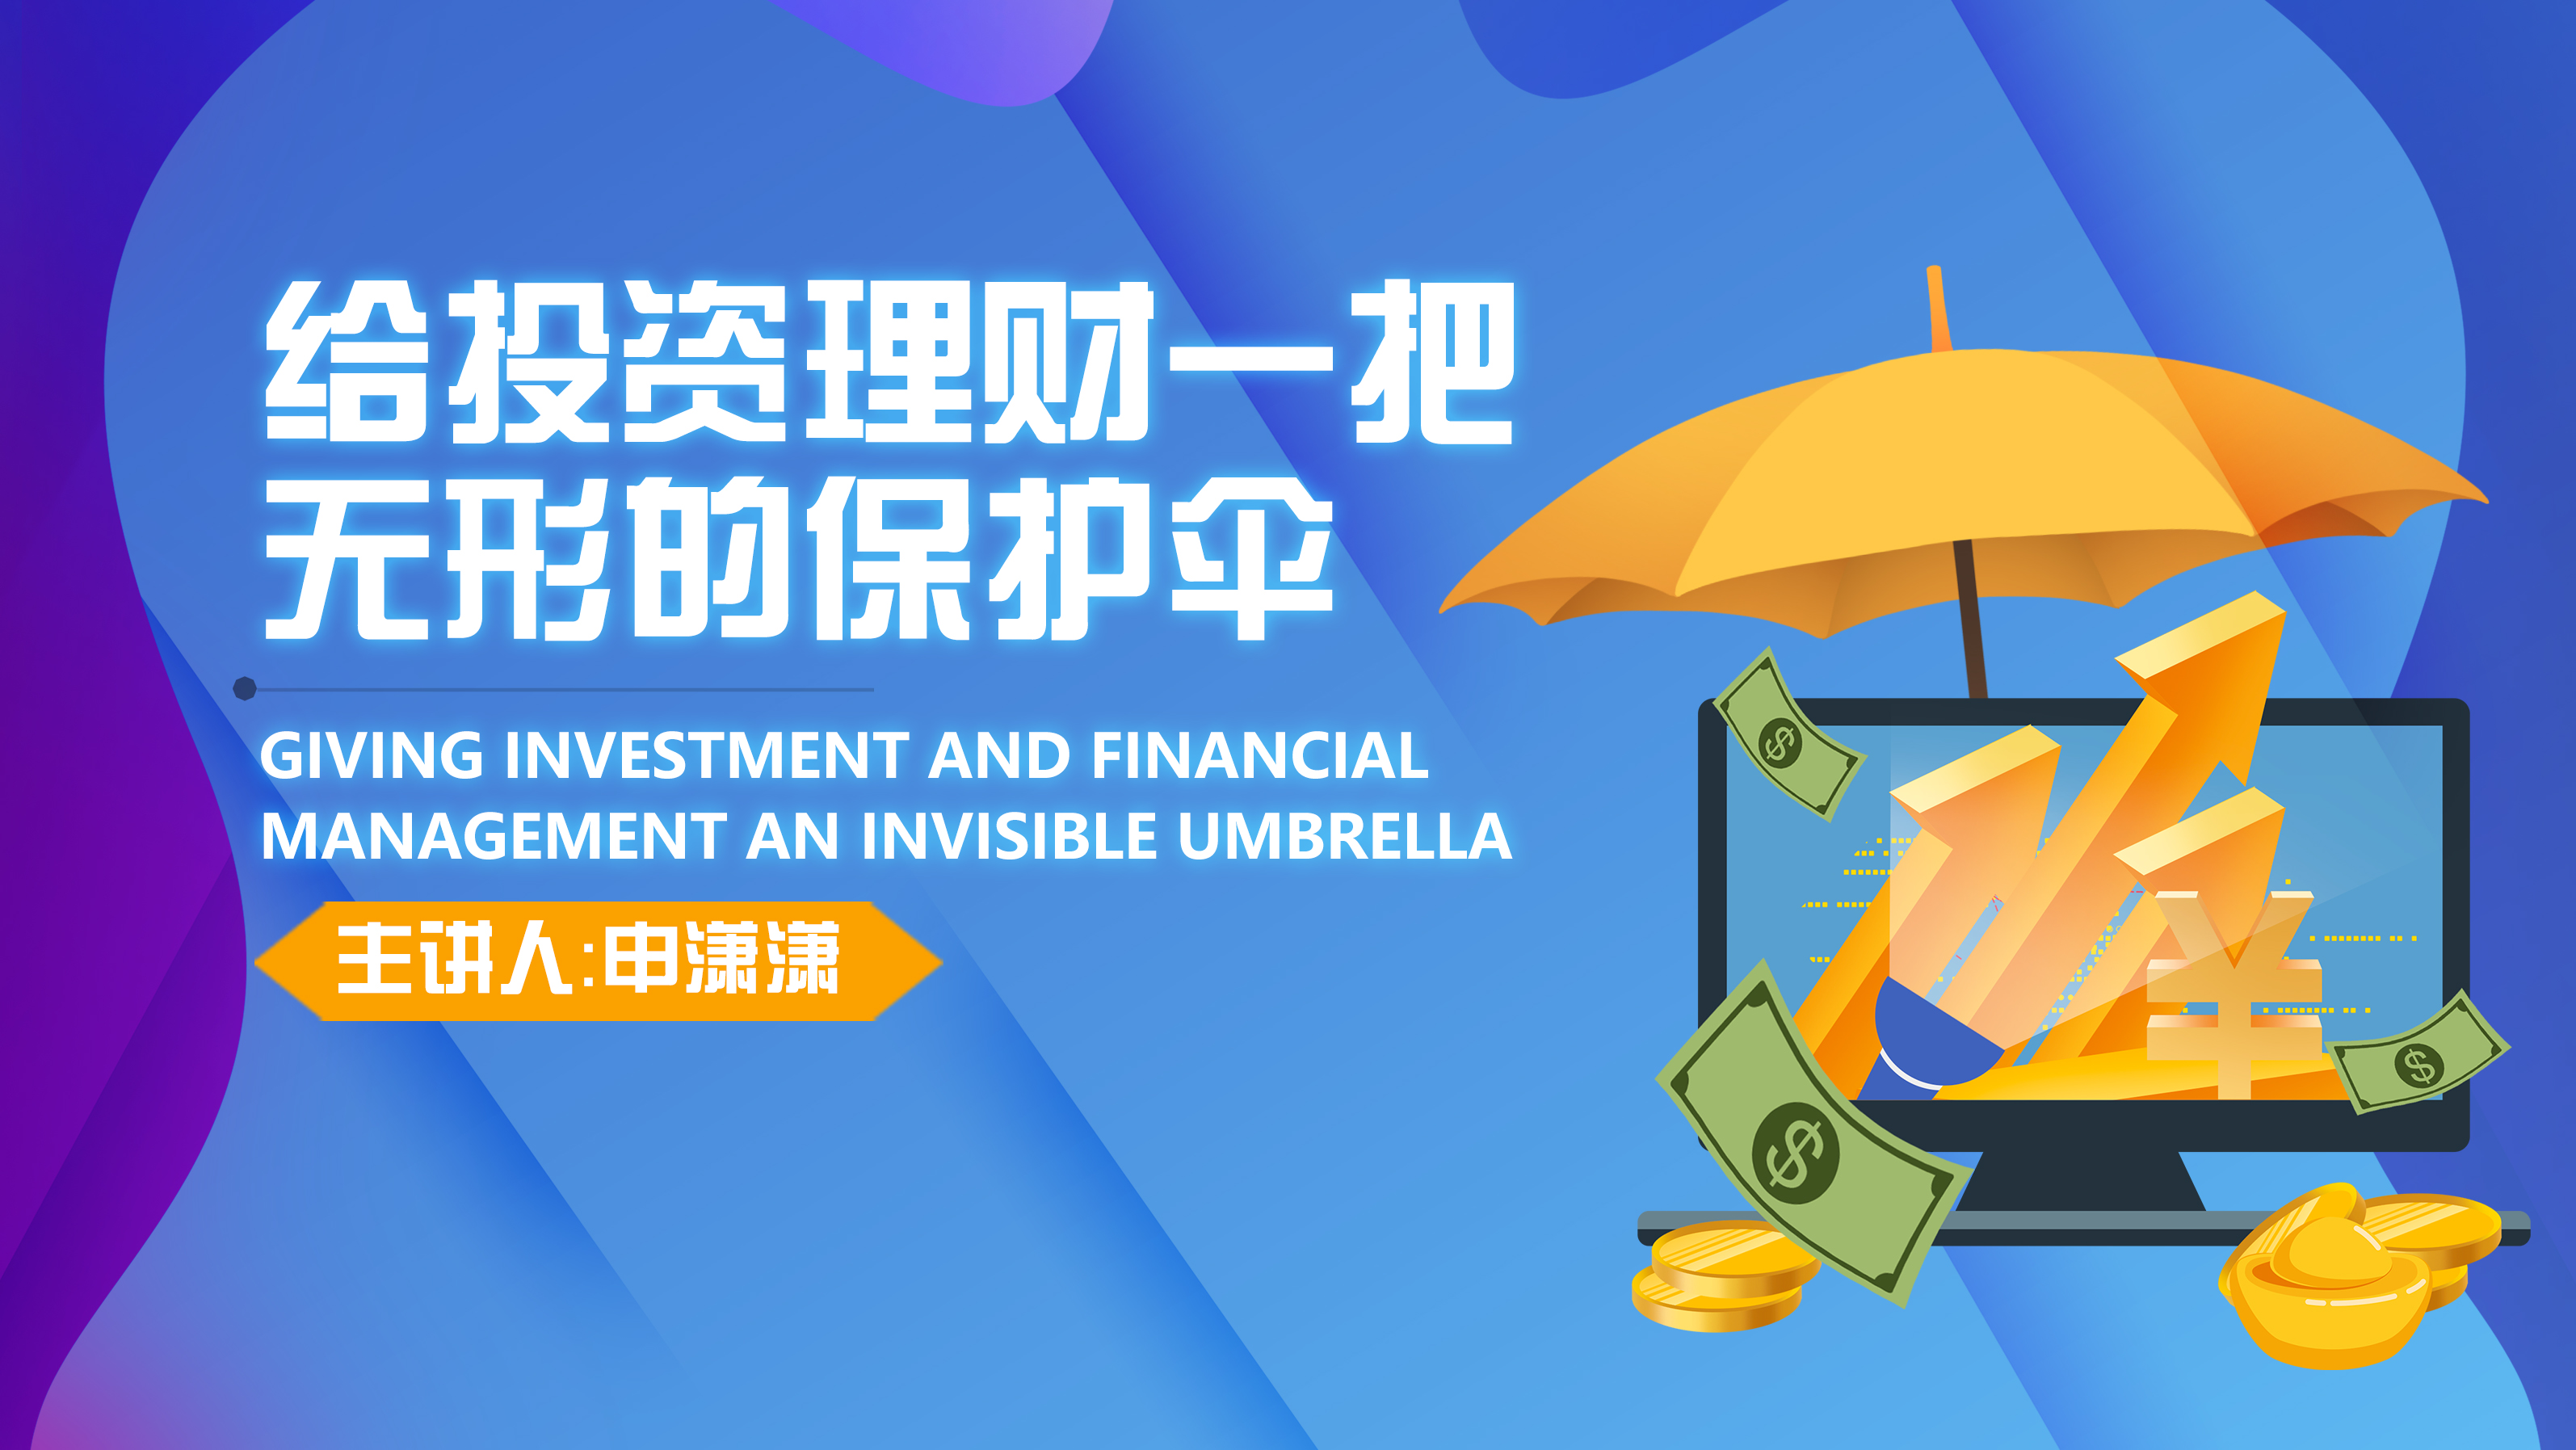 Giving investment and financial management an invisible umbrella